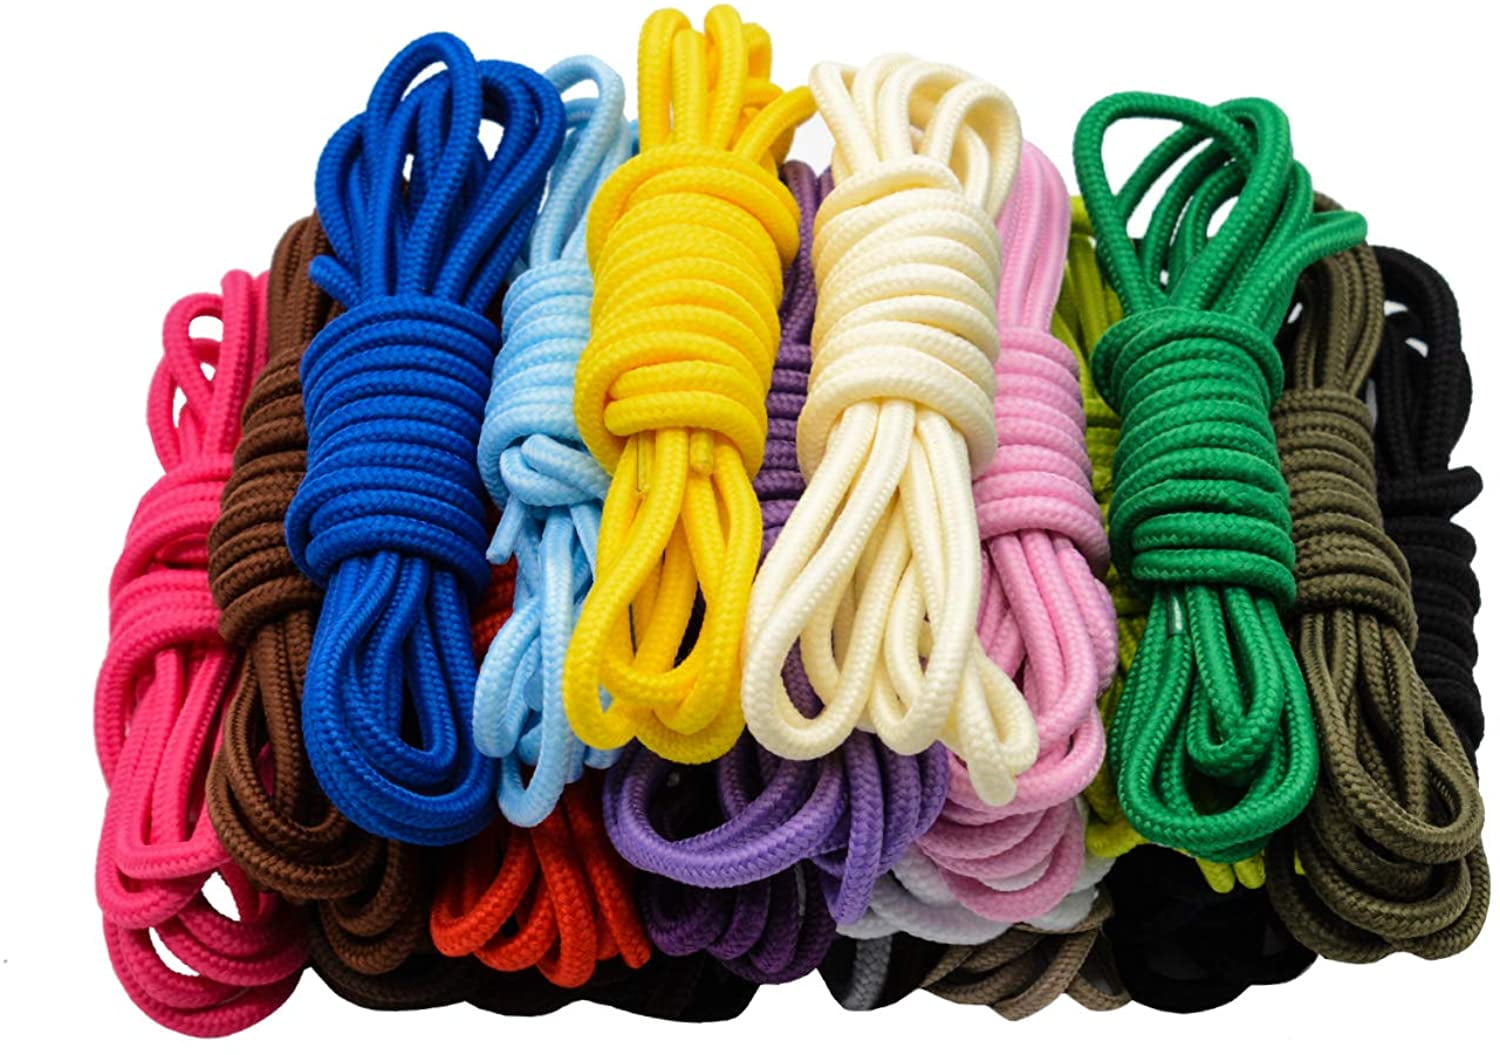 ROUND SHOE LACES PAIR OF SHOELACES FOR HIKING BOOTS TRAINERS 5MM THICK ROPE LACE 